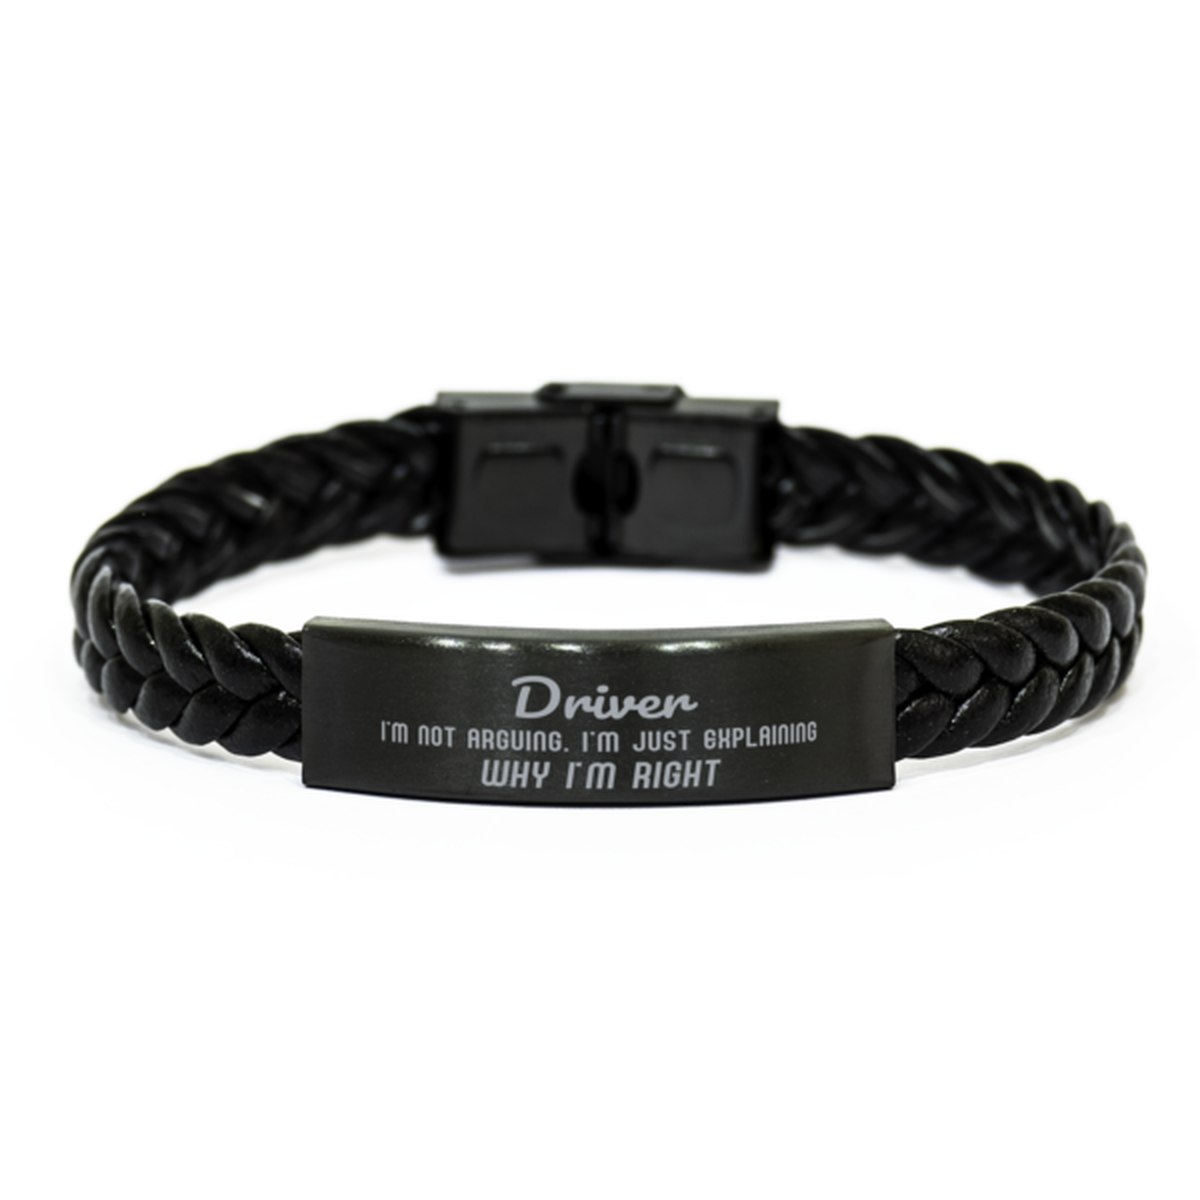 Driver I'm not Arguing. I'm Just Explaining Why I'm RIGHT Braided Leather Bracelet, Graduation Birthday Christmas Driver Gifts For Driver Funny Saying Quote Present for Men Women Coworker